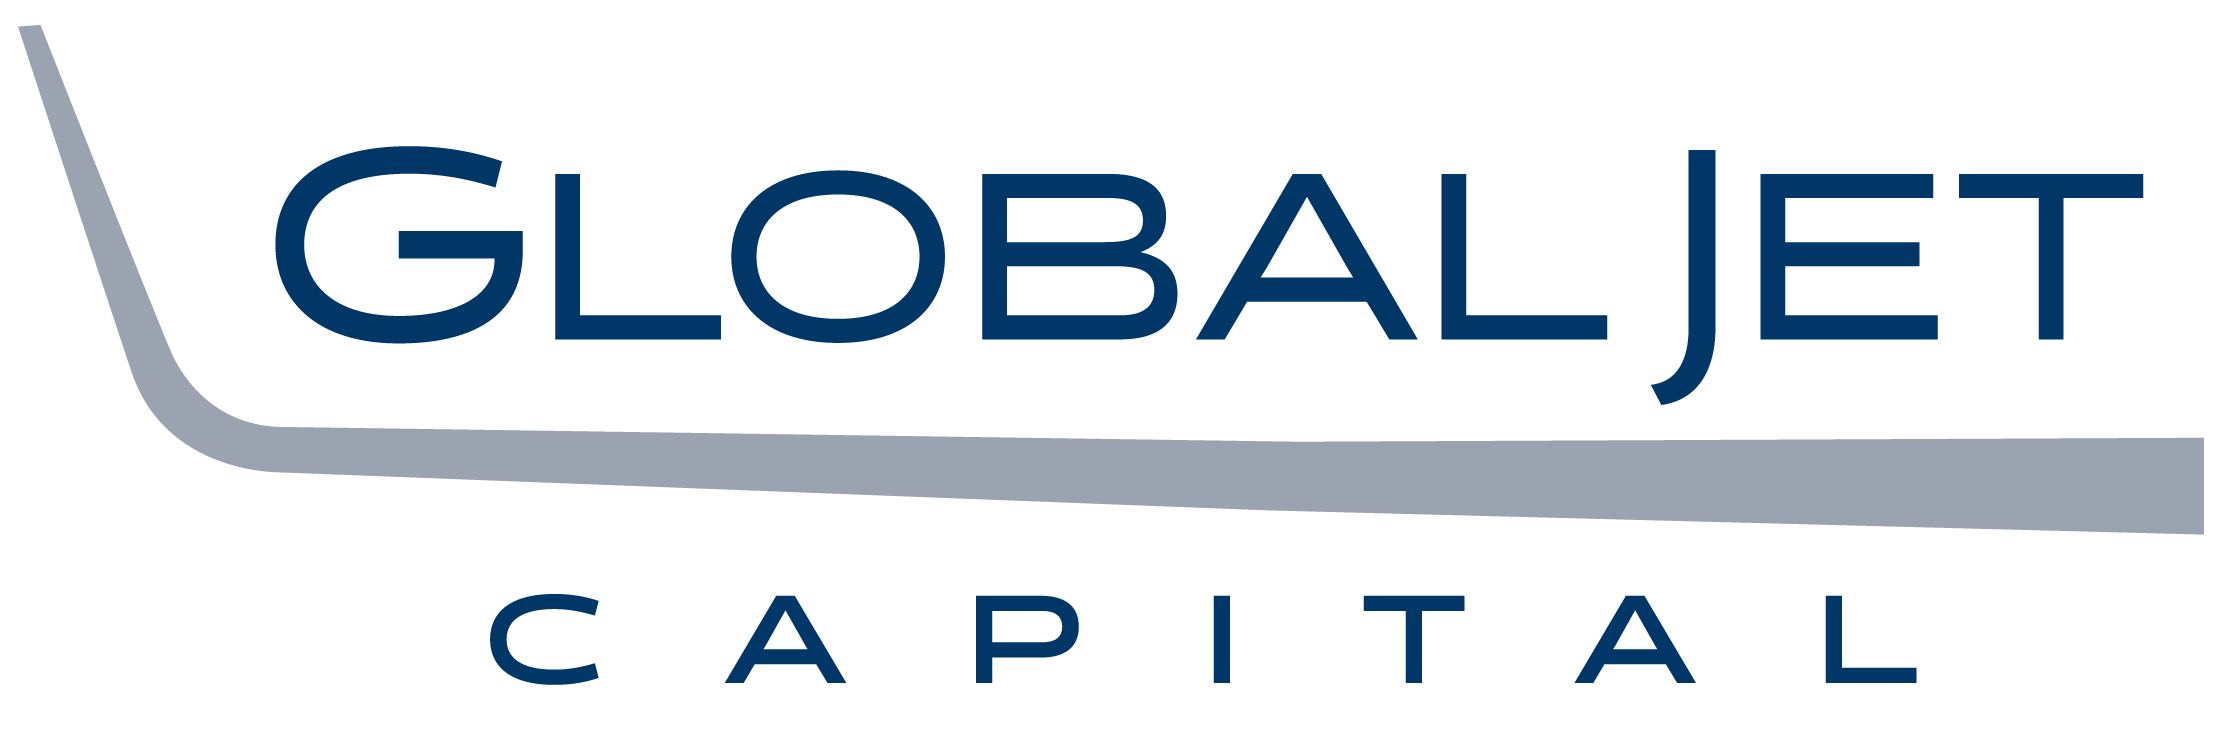 Global Jet Capital Leasing Lending Solutions For Business Aircraft